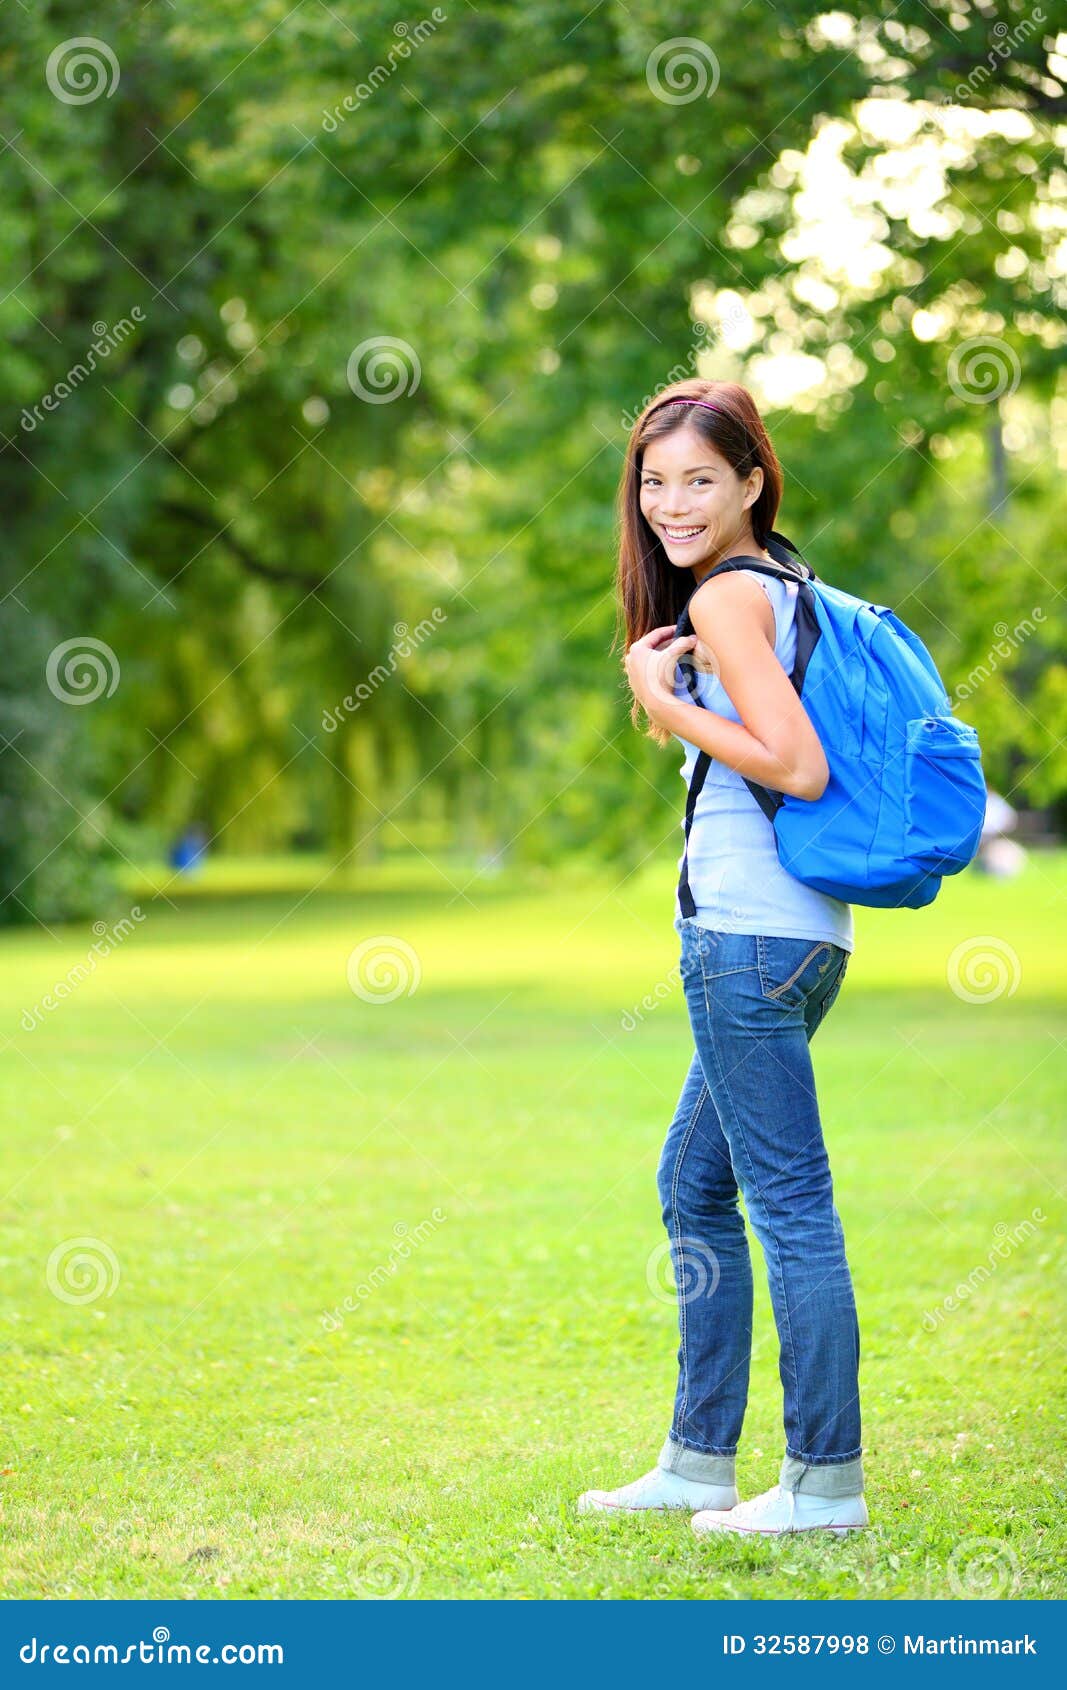 Student Girl Portrait Wearing Backpack Outdoor Royalty Free Stock